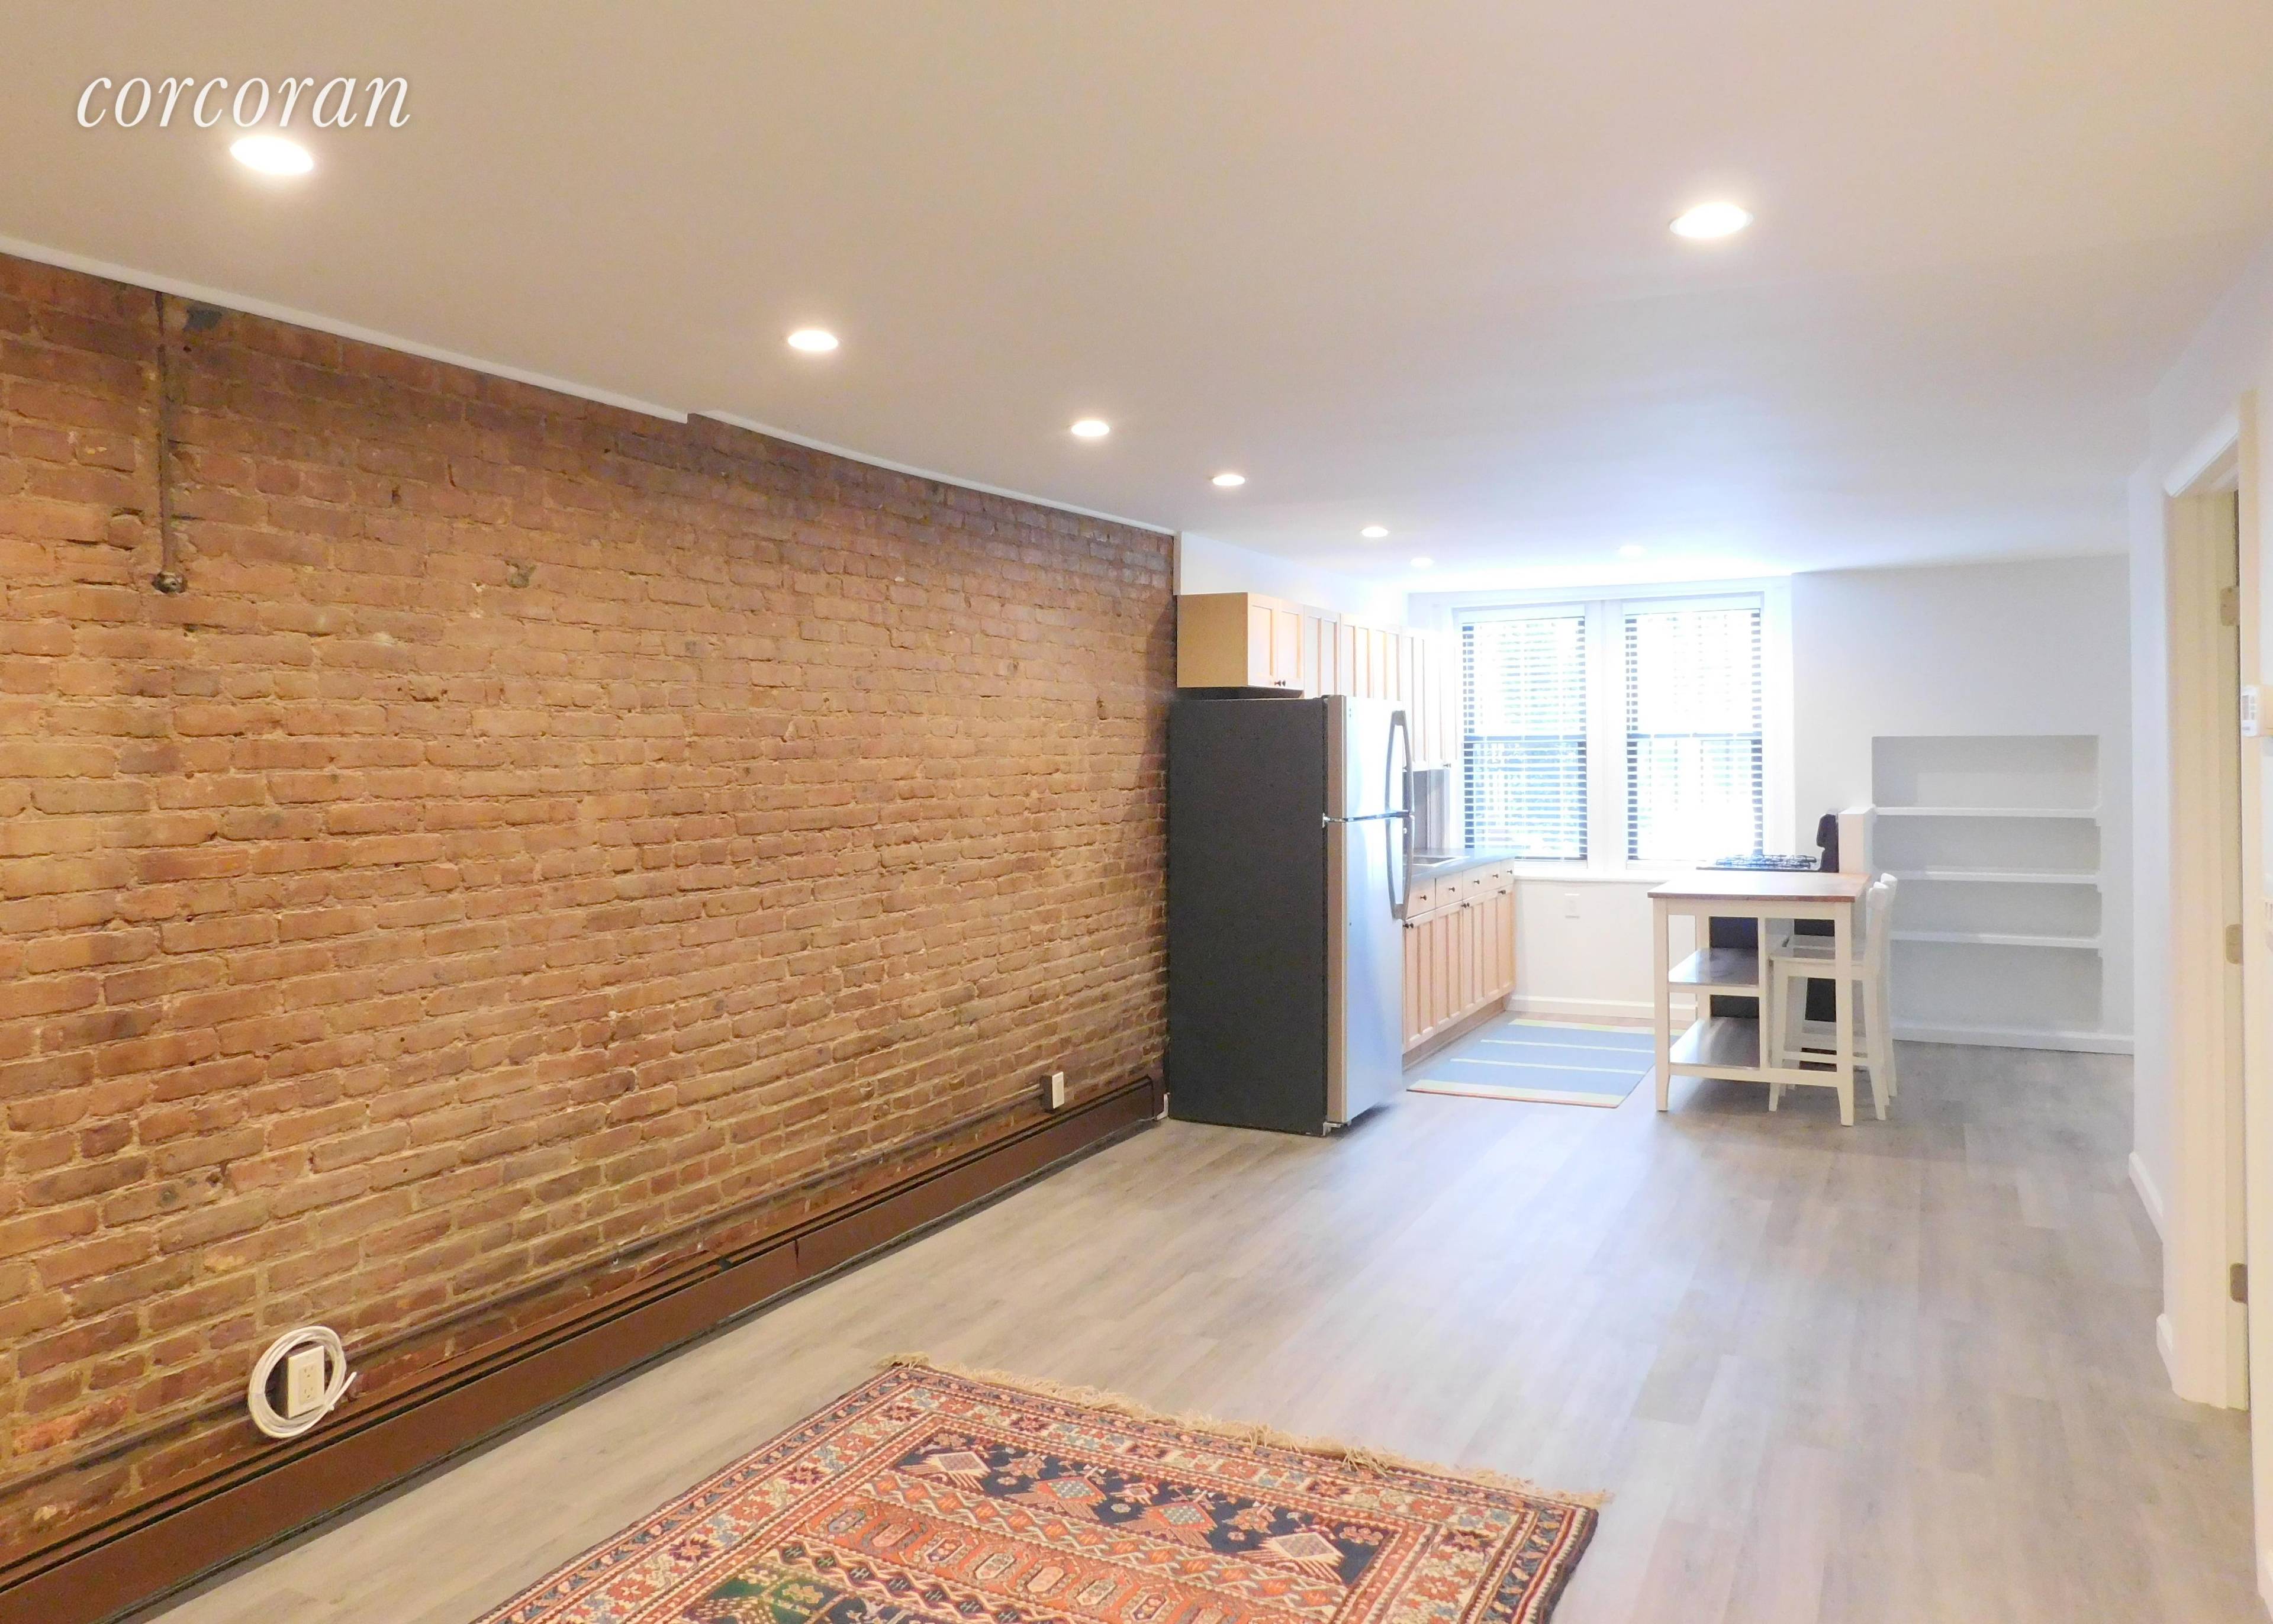 This totally renovated park block garden apartment has it all including your own washer dryer and an enormous shared garden.